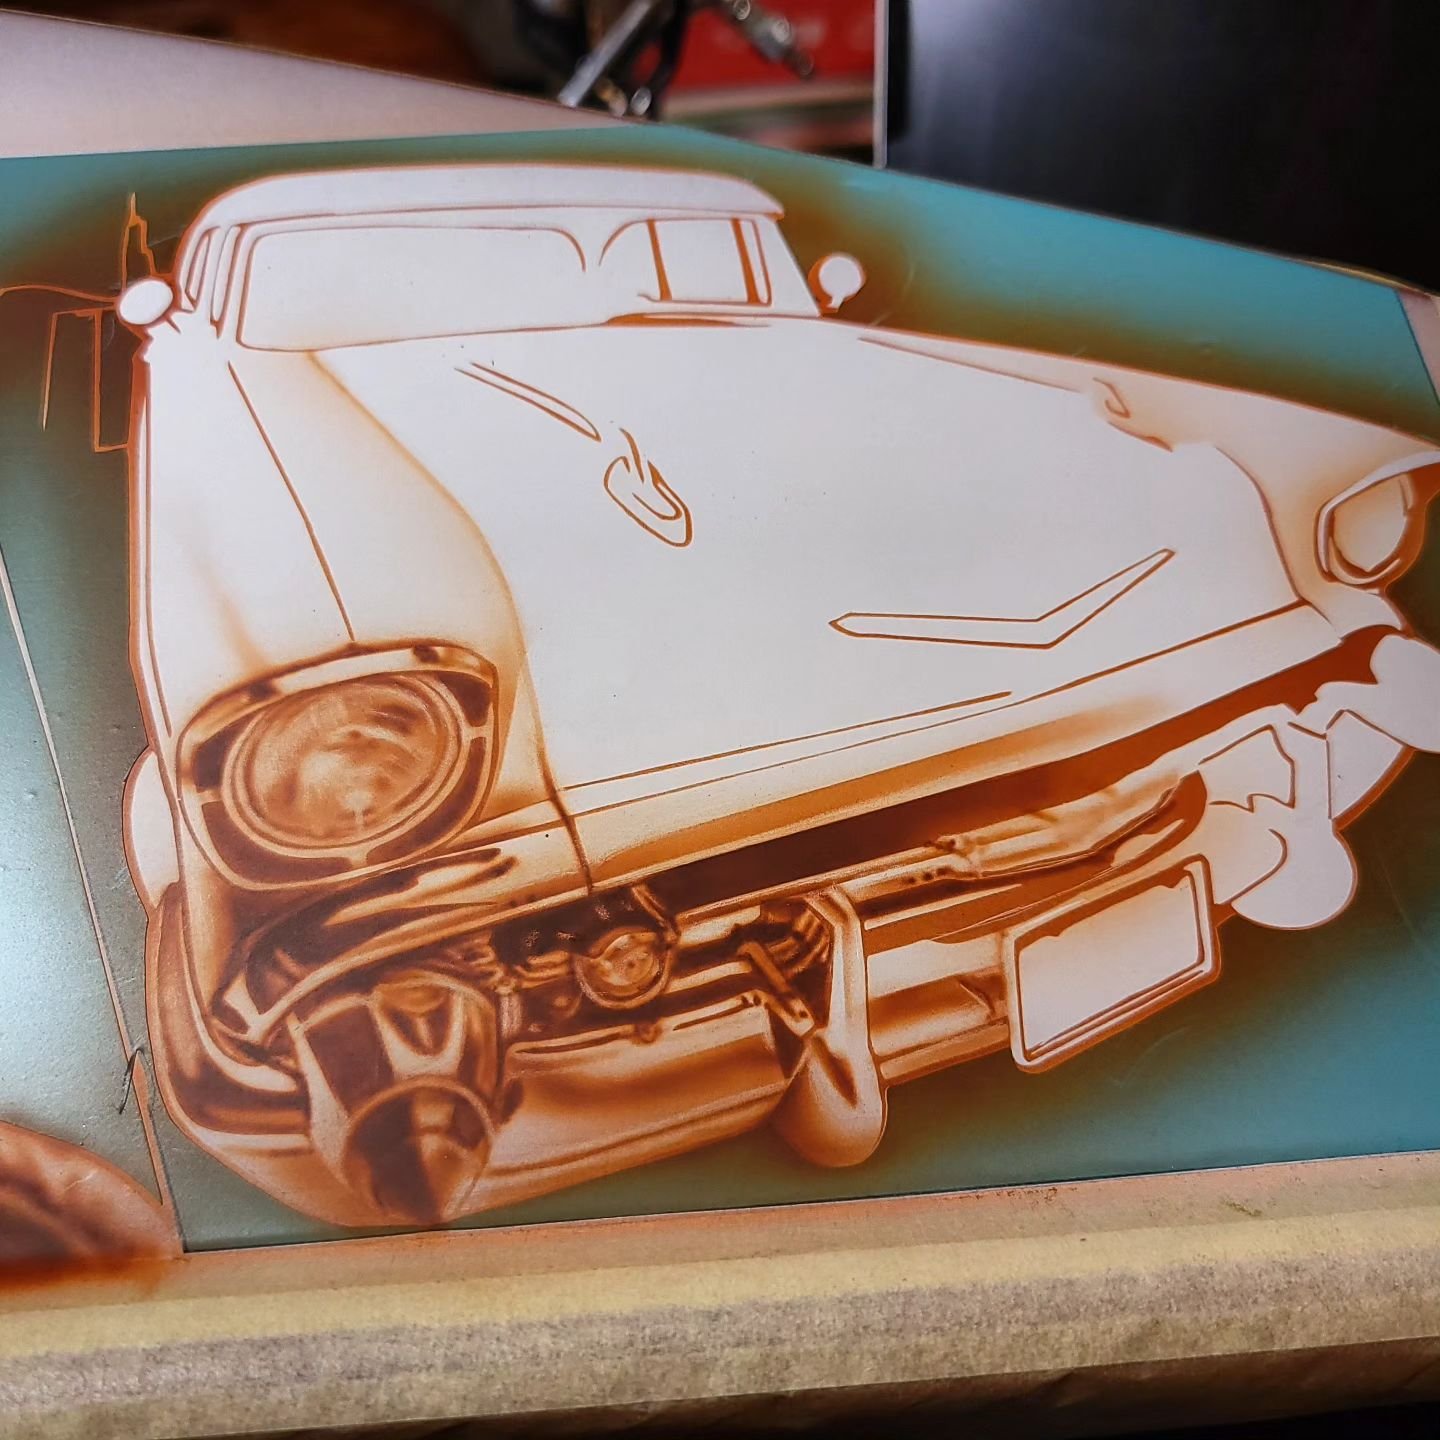 Working 💪 
57 Bel air skirt murals almost done.

Book your mural or tattoo appointment at www.sunnytheartist.com 

#lowrider #muralart #airbrush #customartwork #artist